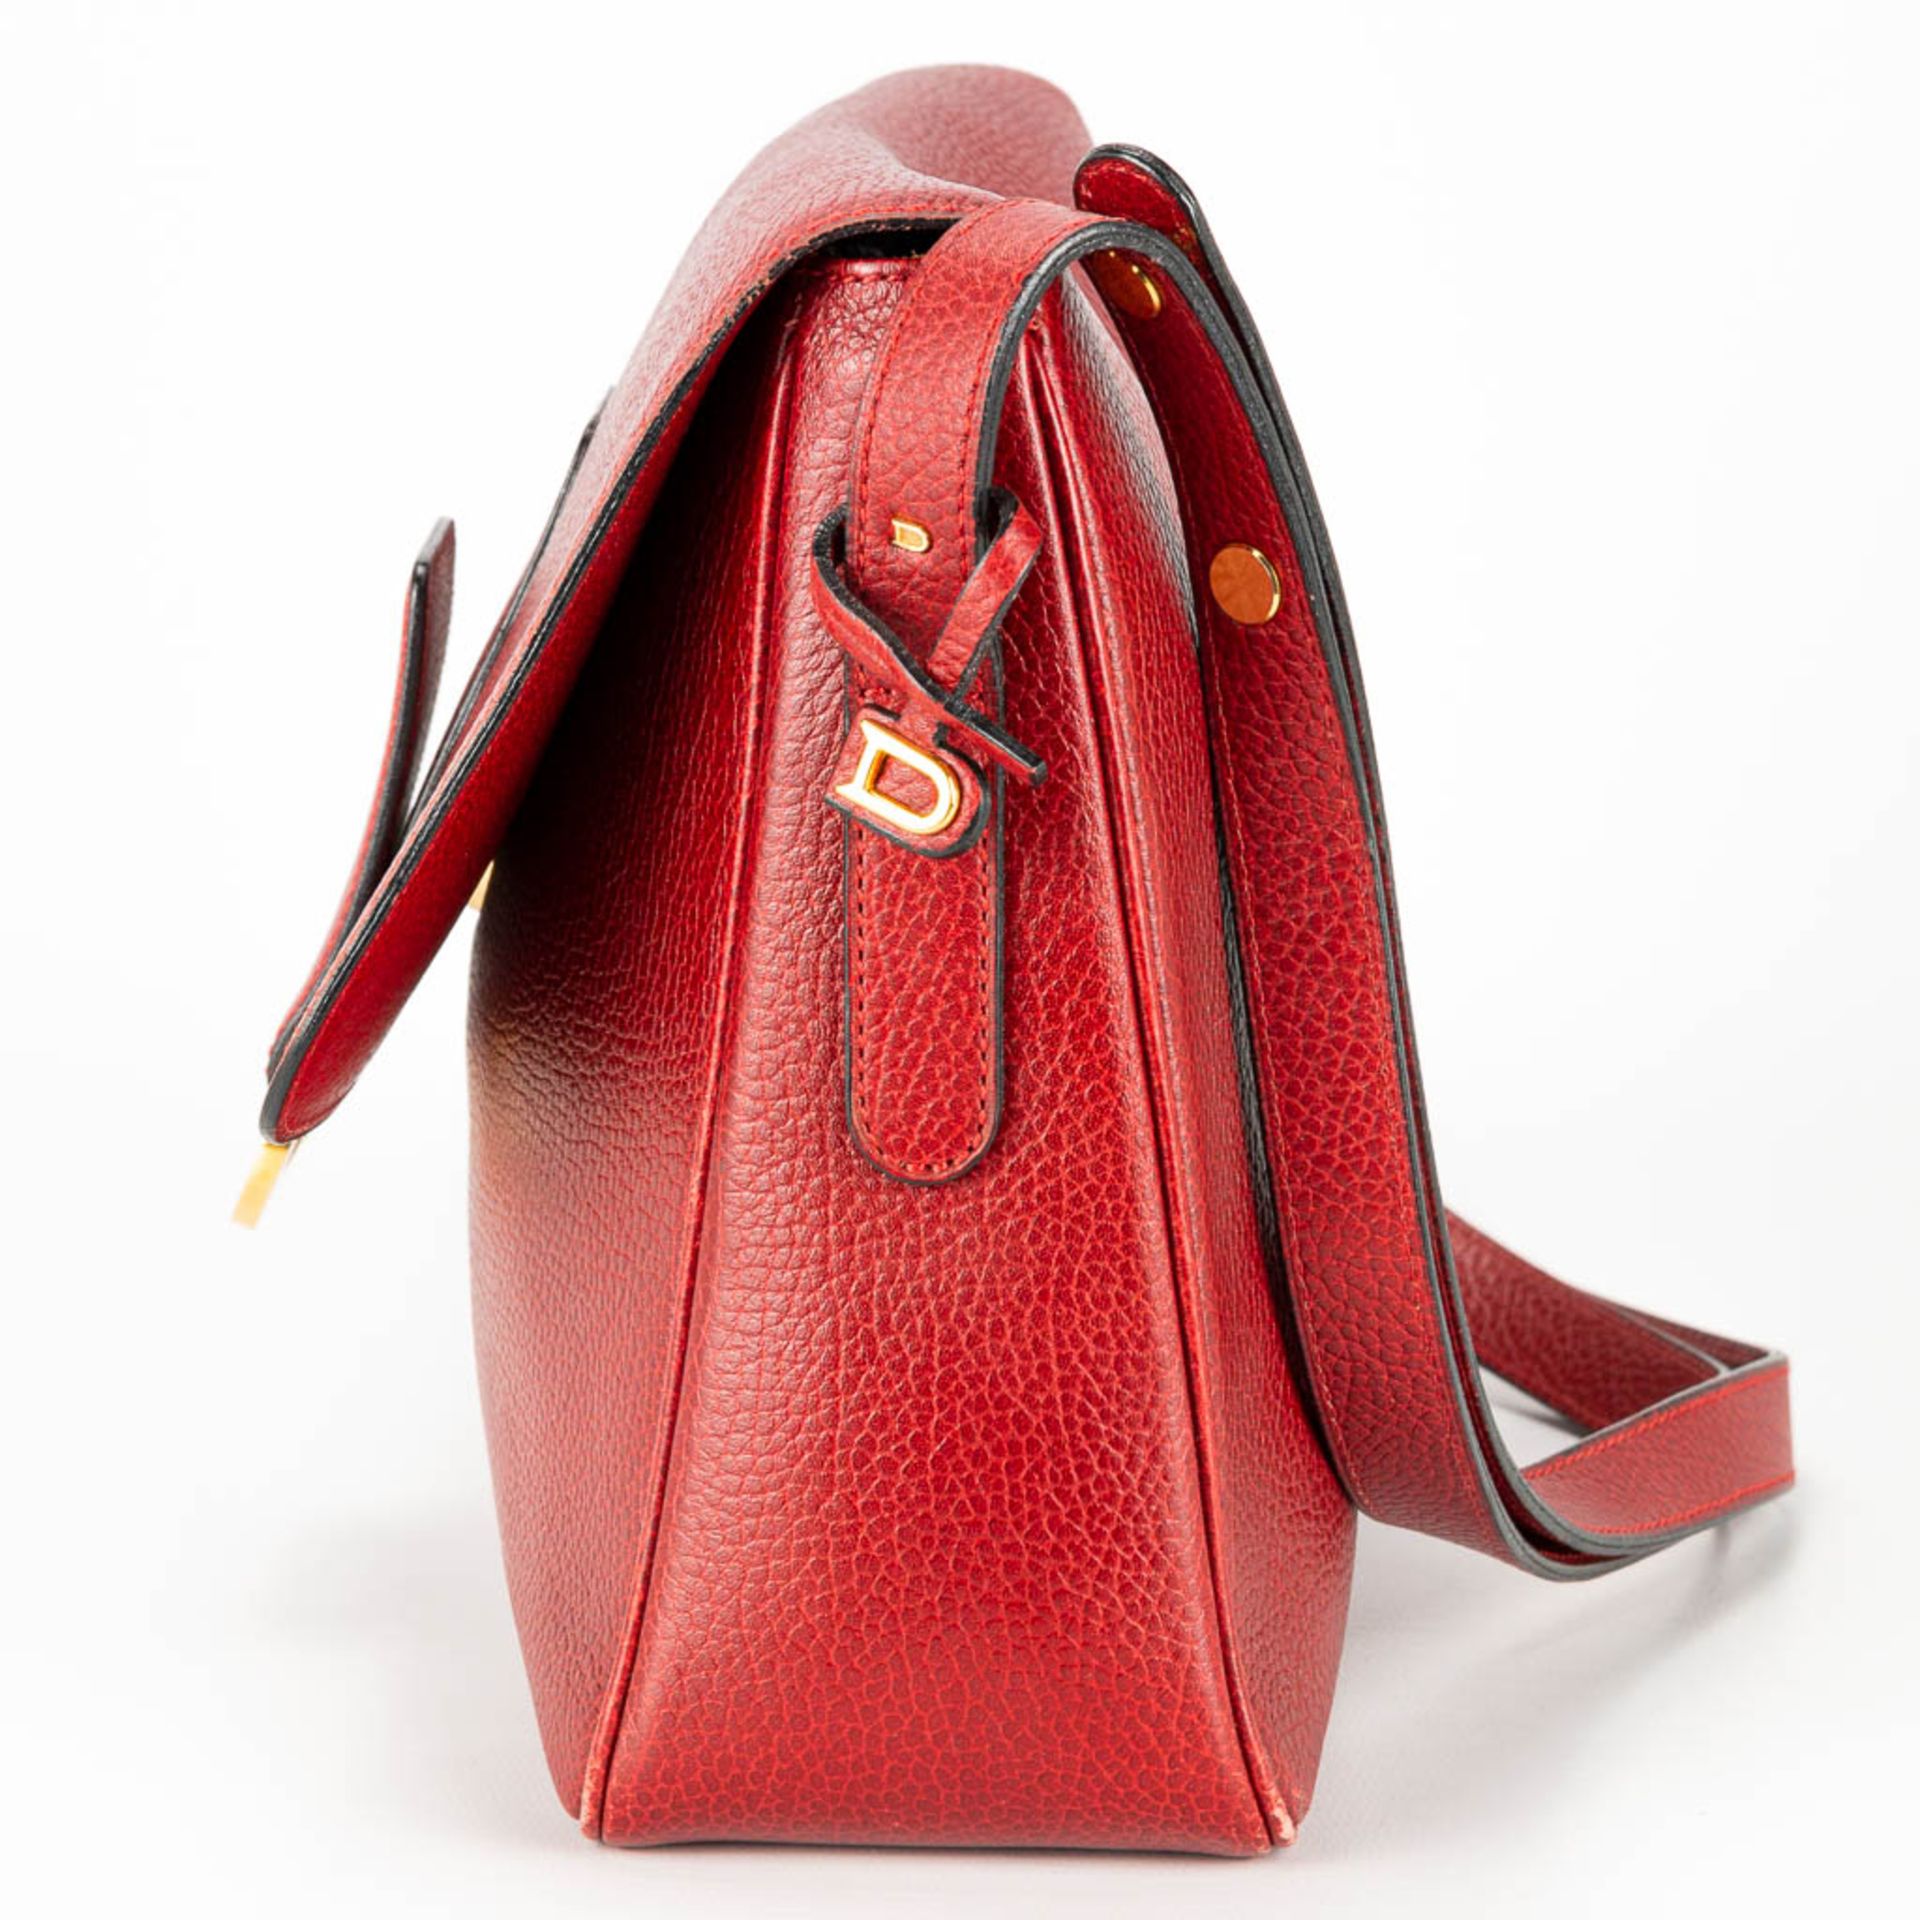 A purse made of red leather and marked Delvaux. - Image 4 of 16